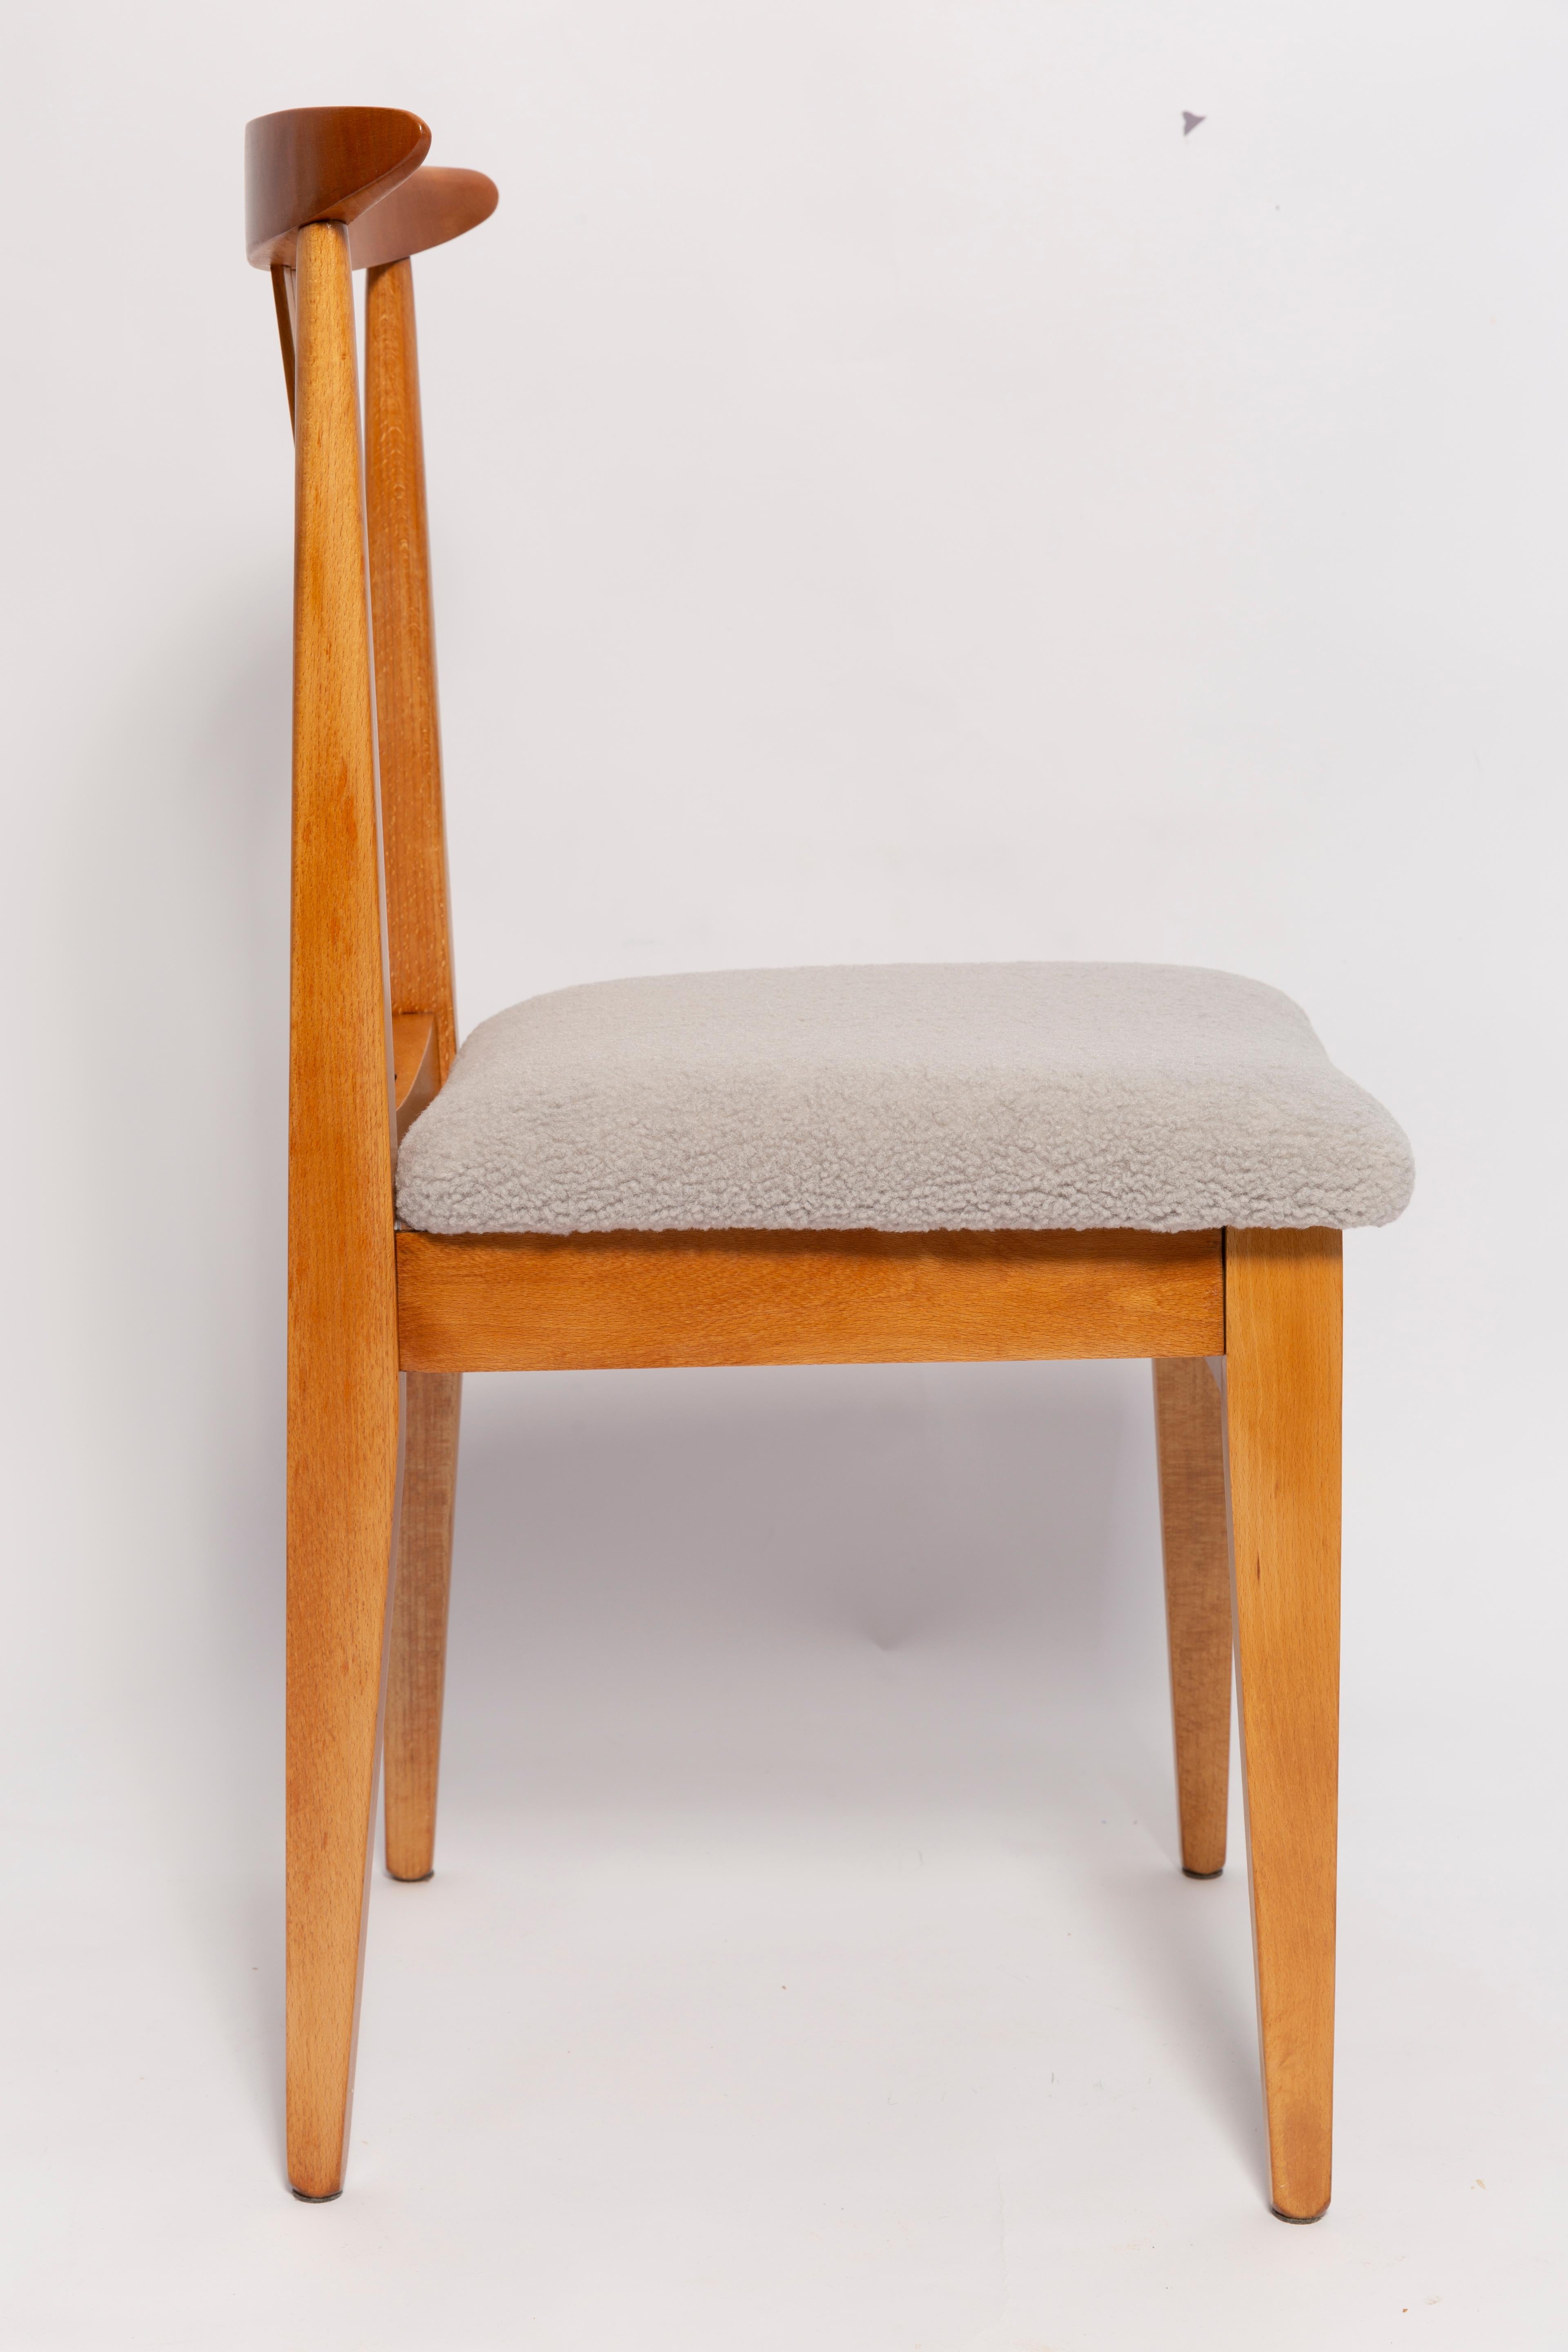 Mid-Century Modern Mid-Century Linen Boucle Chair, Light Wood, by M. Zielinski, Europe, 1960s For Sale